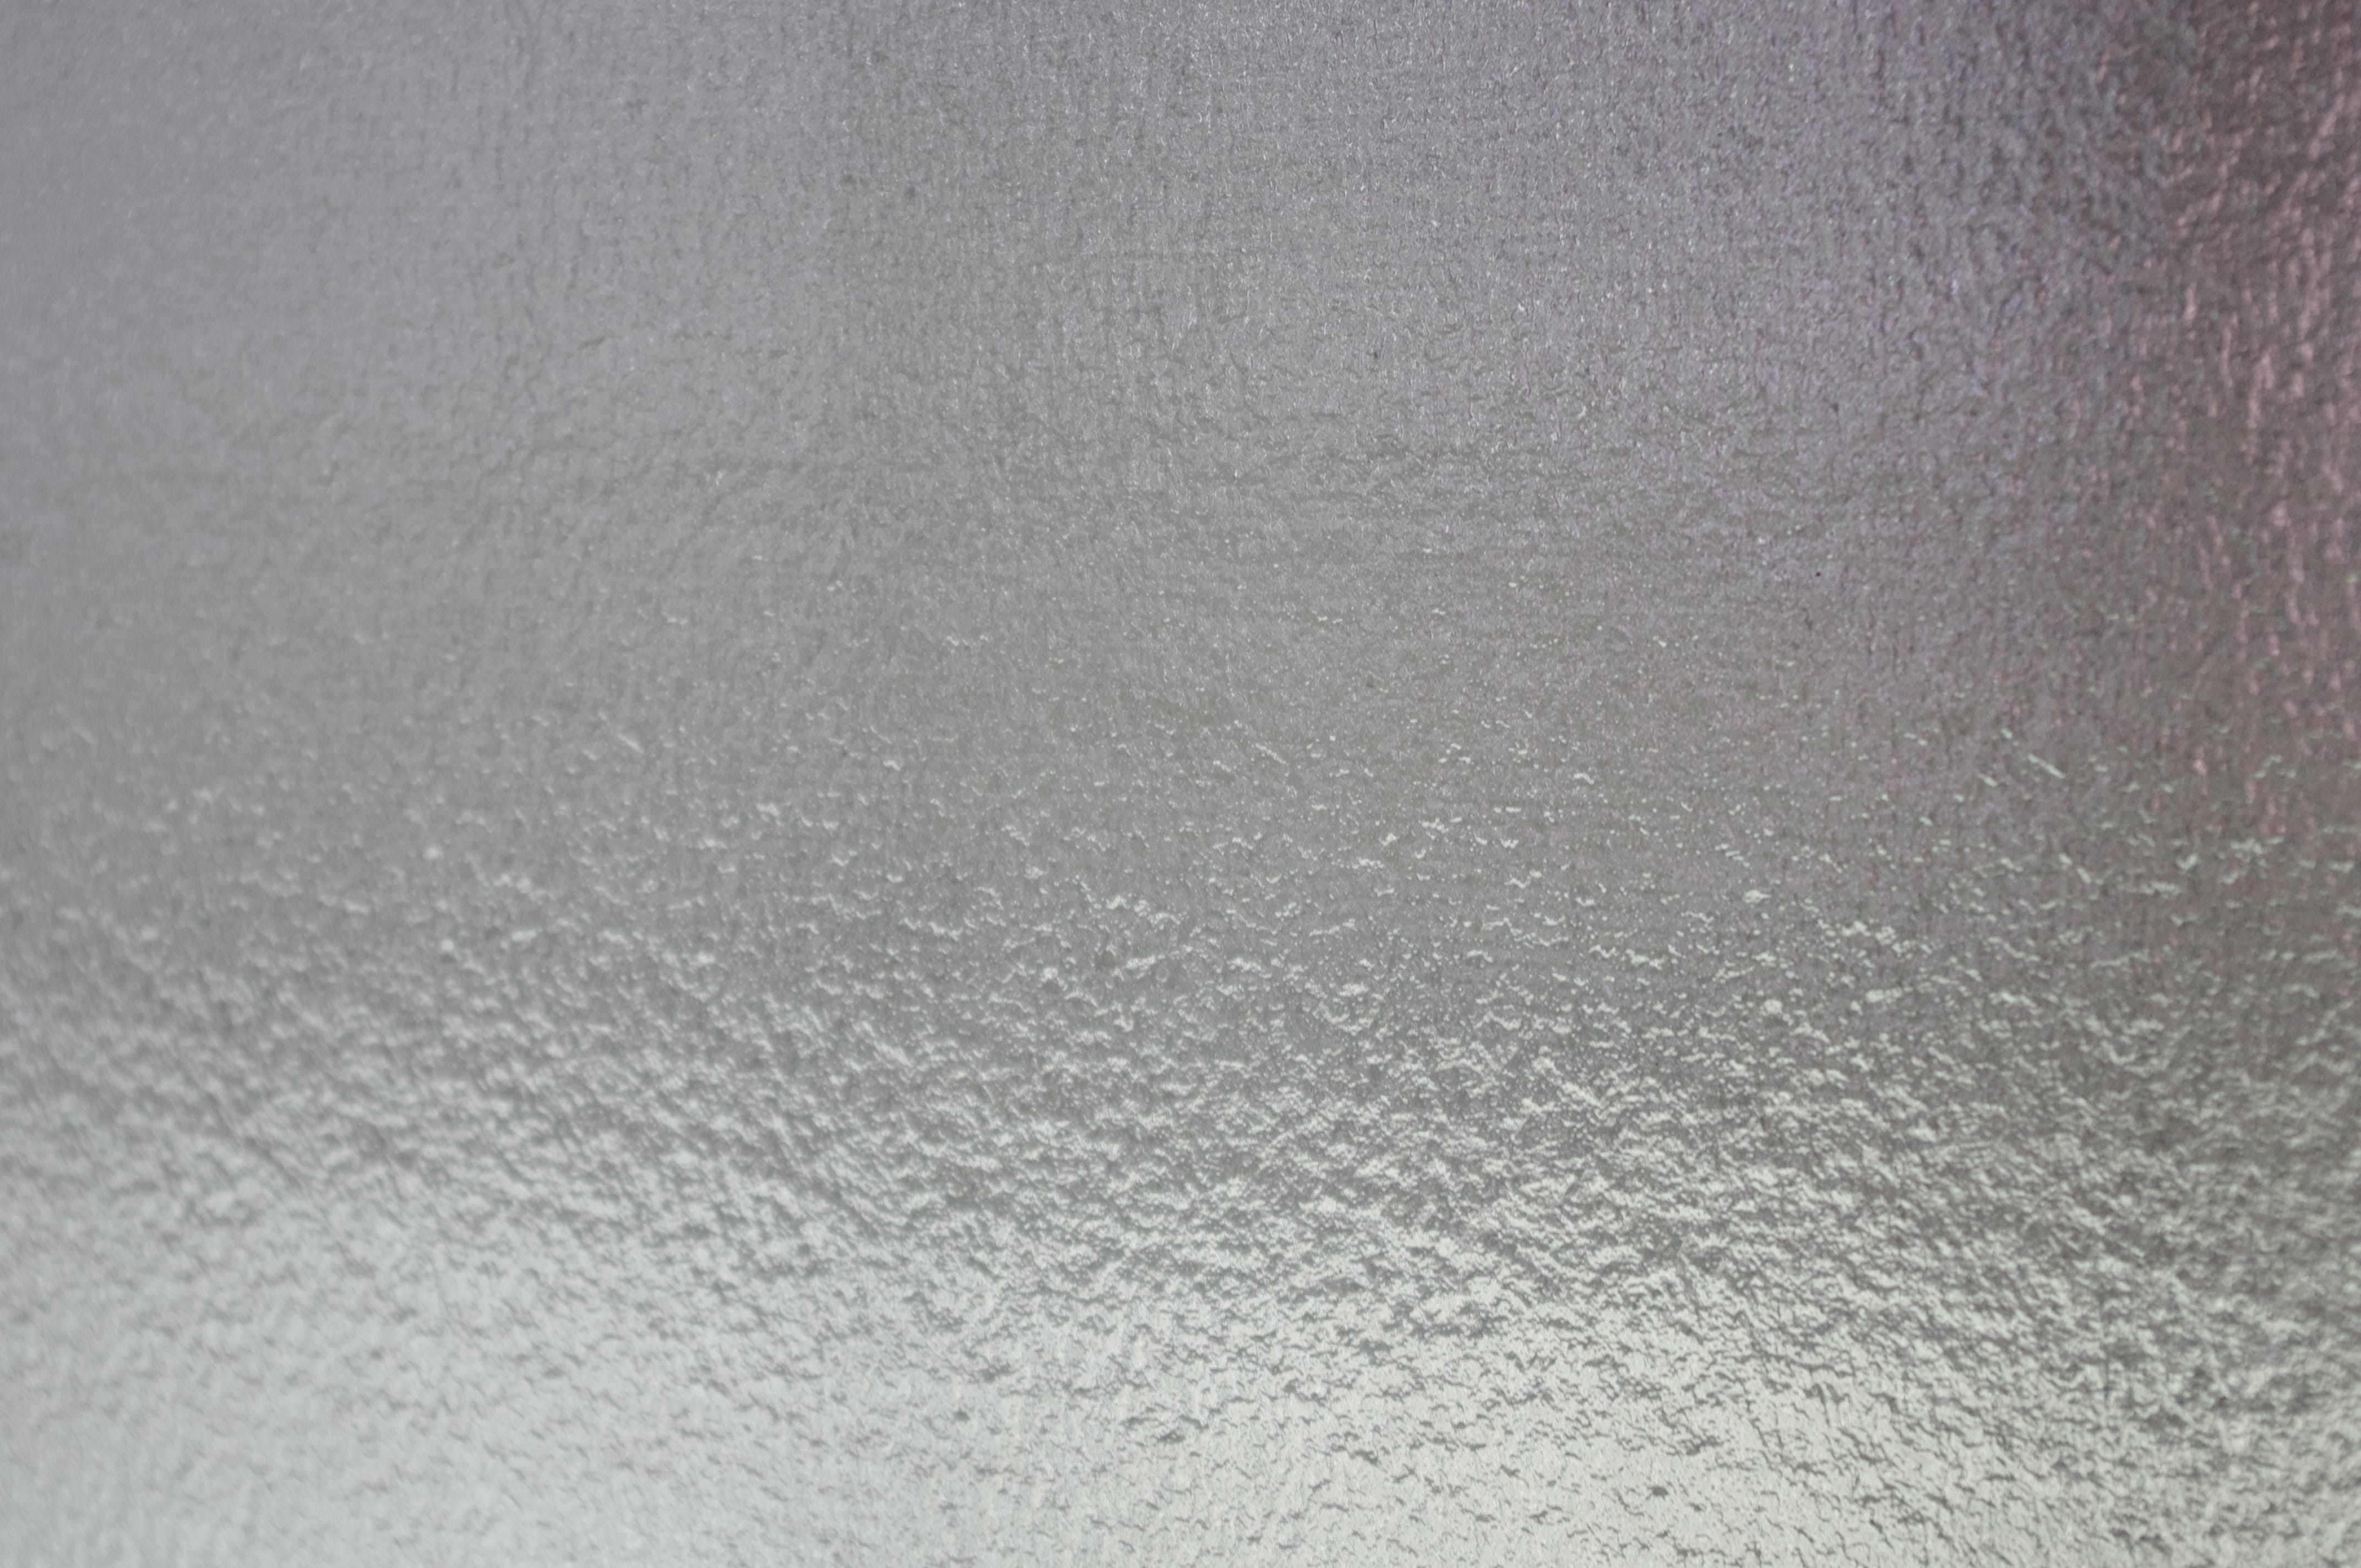 frosted glass, water, backgrounds, gray, textured, no people